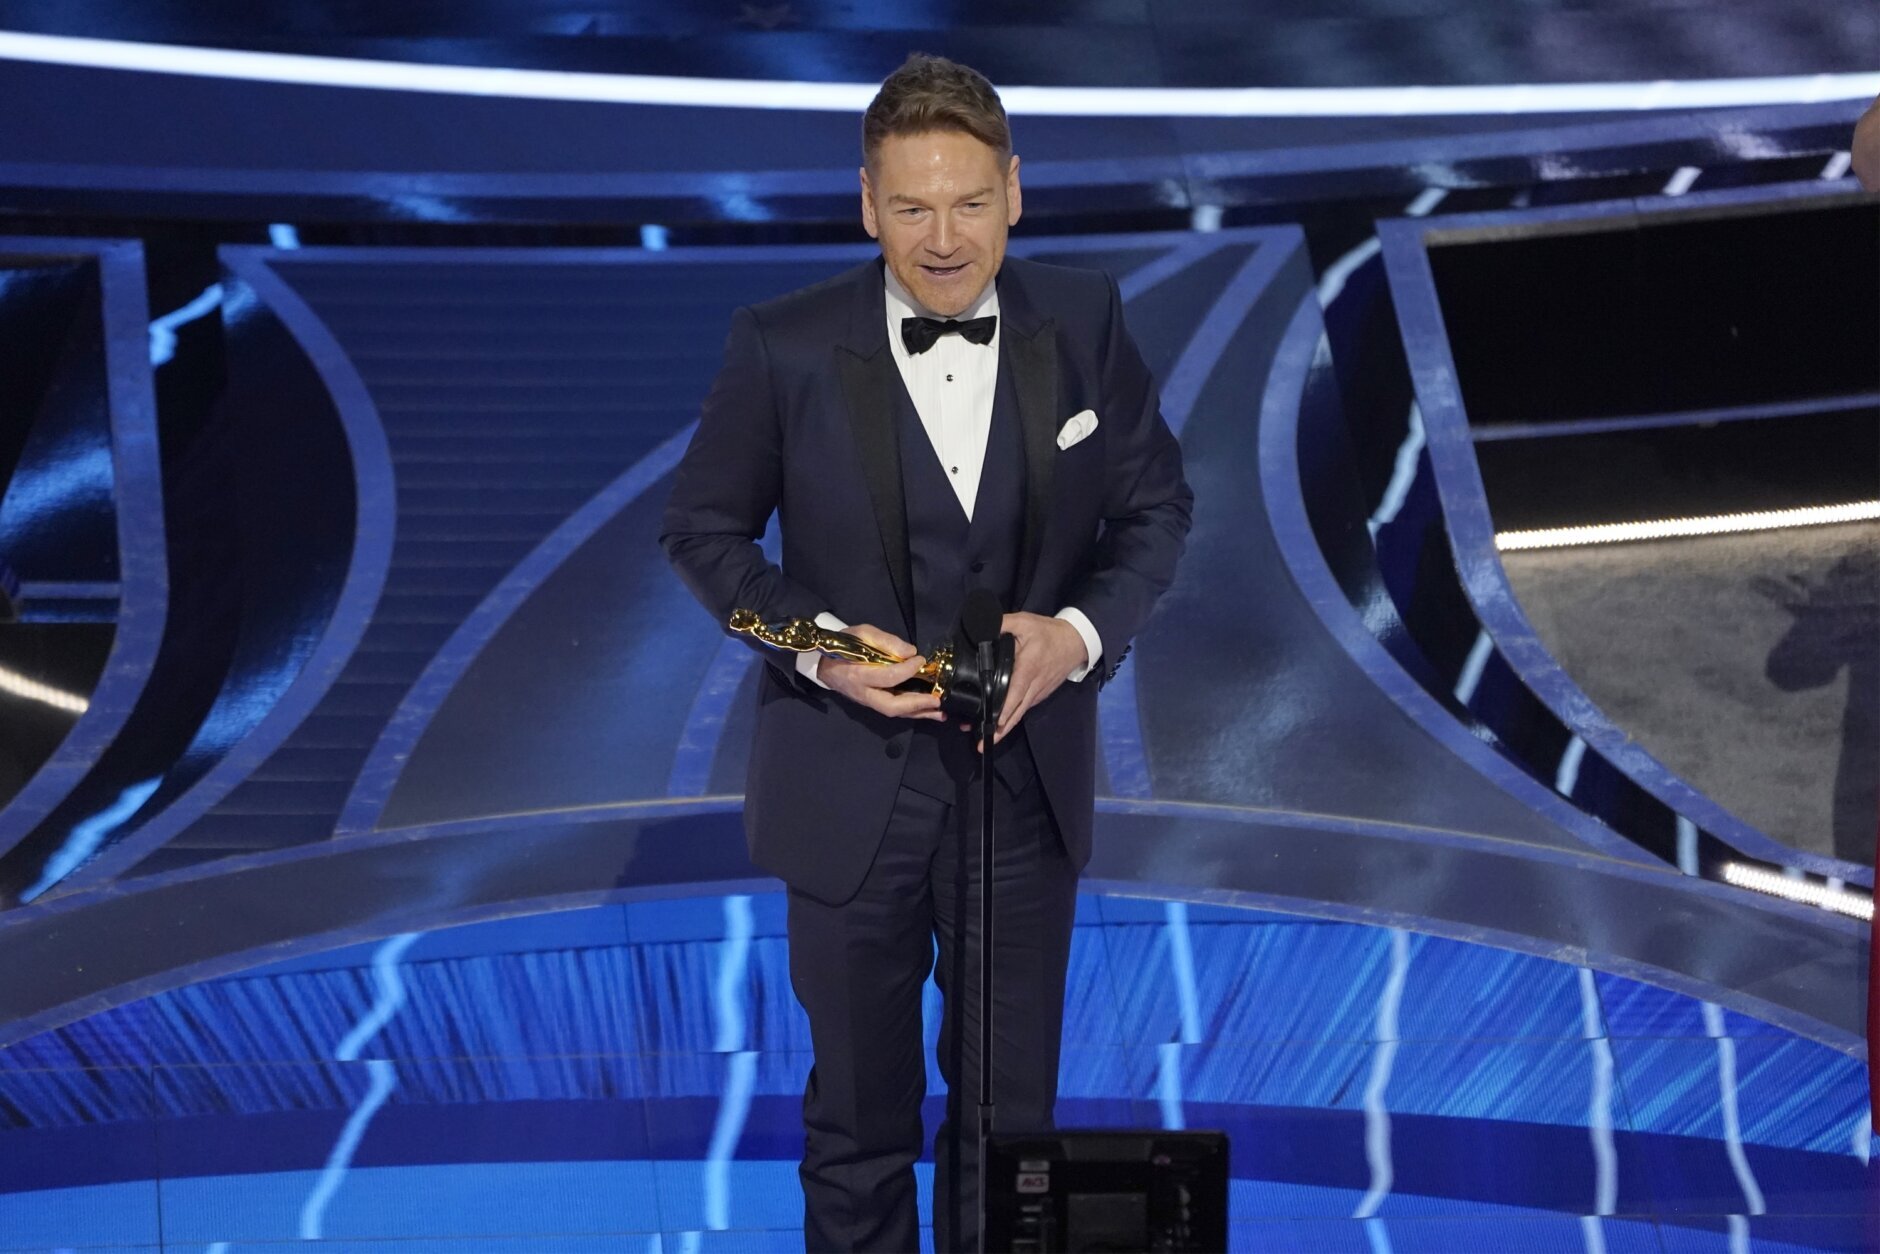 Kenneth Branagh accepts the award for best original screenplay for "Belfast" at the Oscars on Sunday, March 27, 2022, at the Dolby Theatre in Los Angeles. (AP Photo/Chris Pizzello)